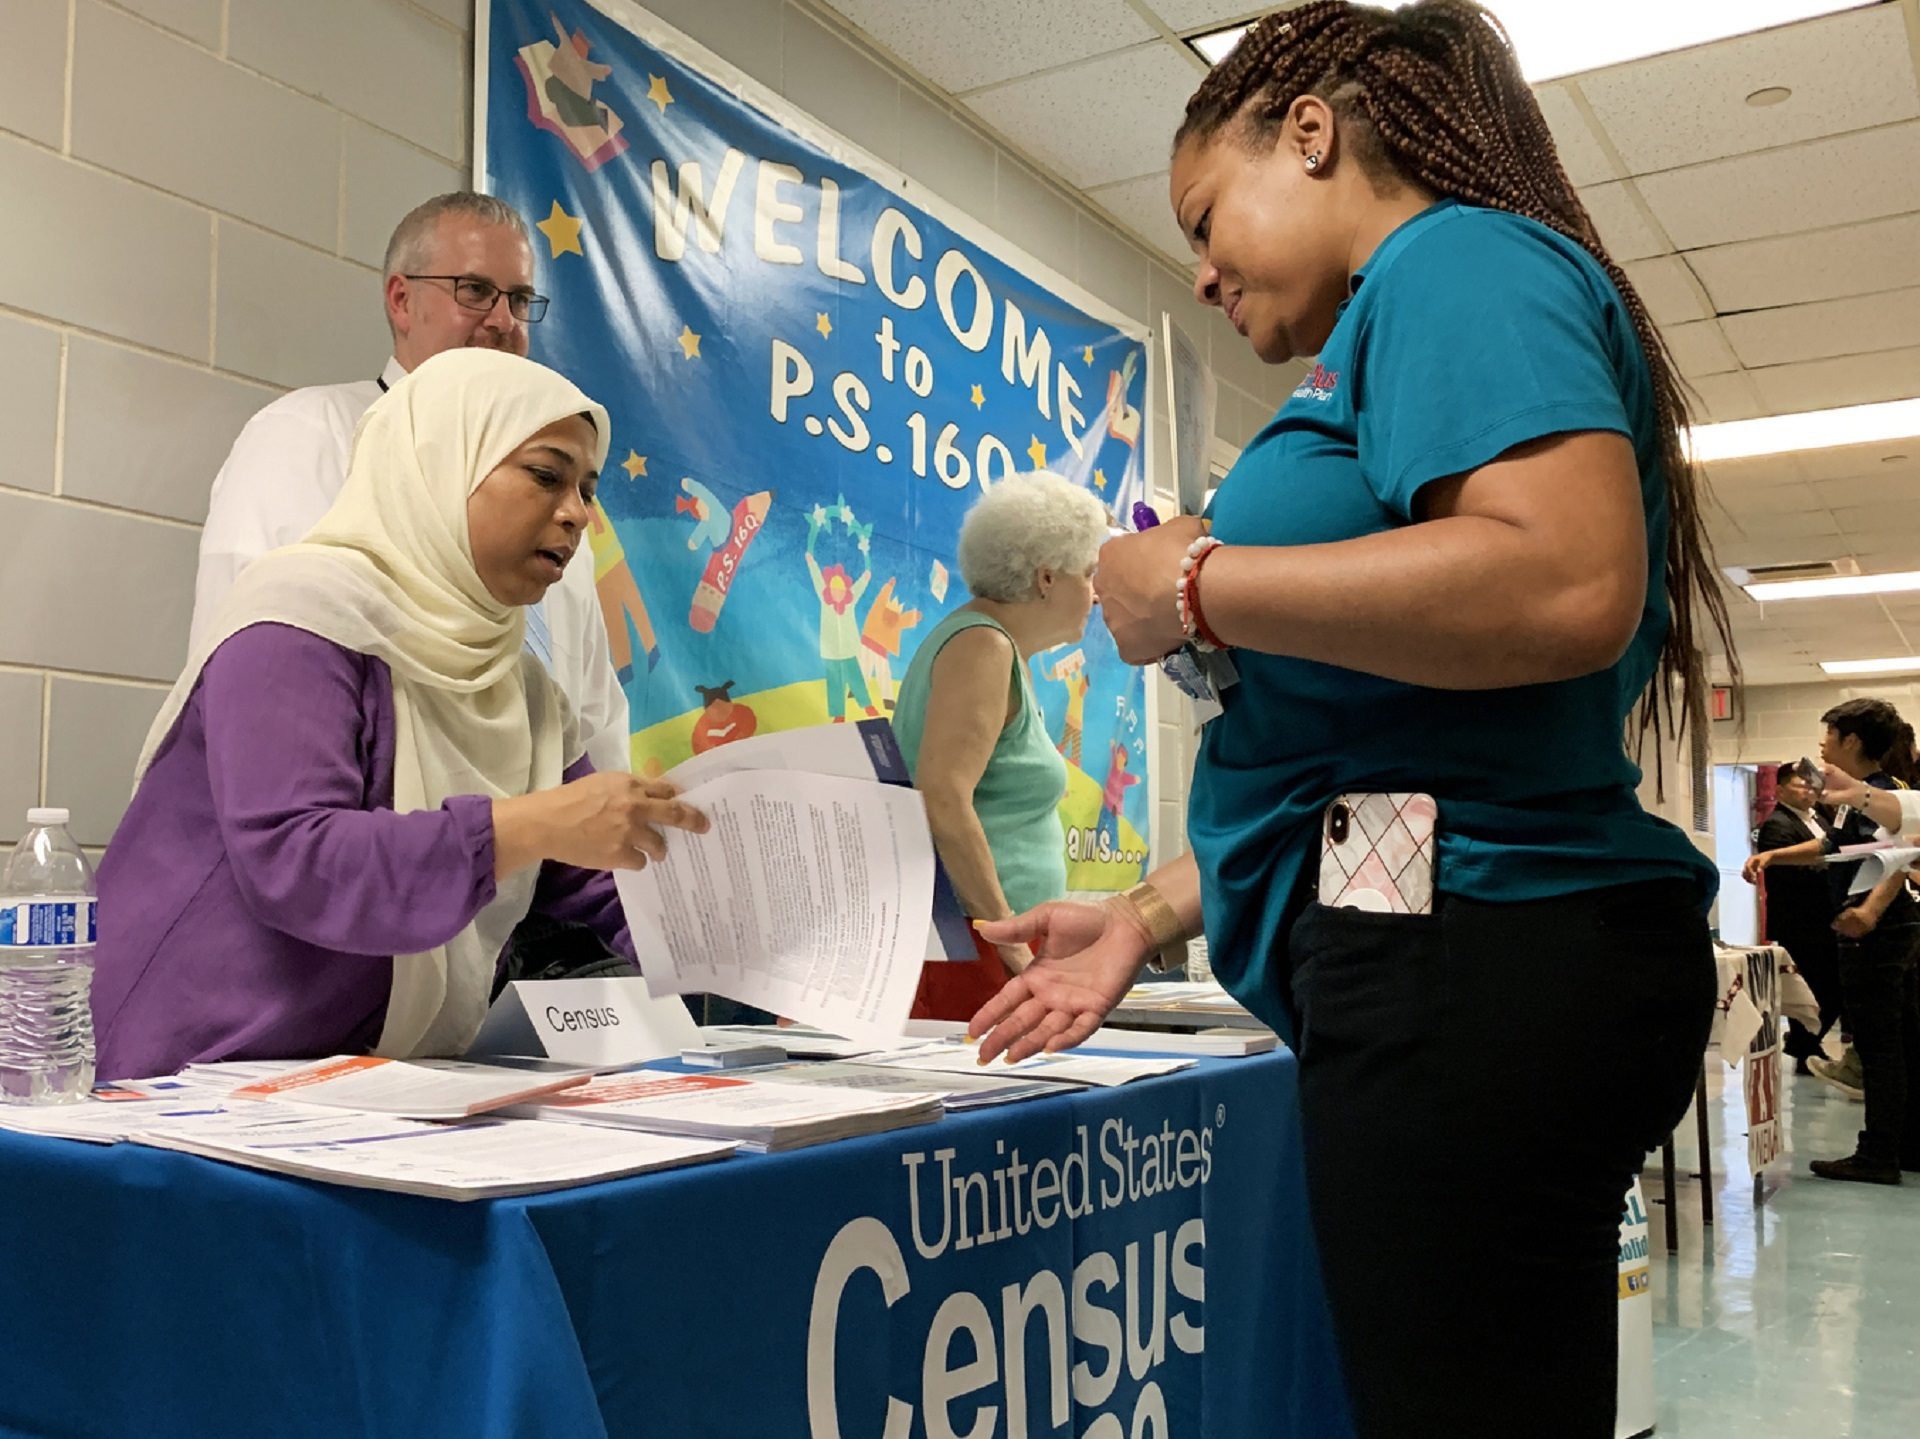 Census Bureau partnership specialist Zakera Ahmed (left) and Jeff Behler, a regional director with the bureau, share information about the 2020 census at an elementary school in Corona, N.Y., in July.